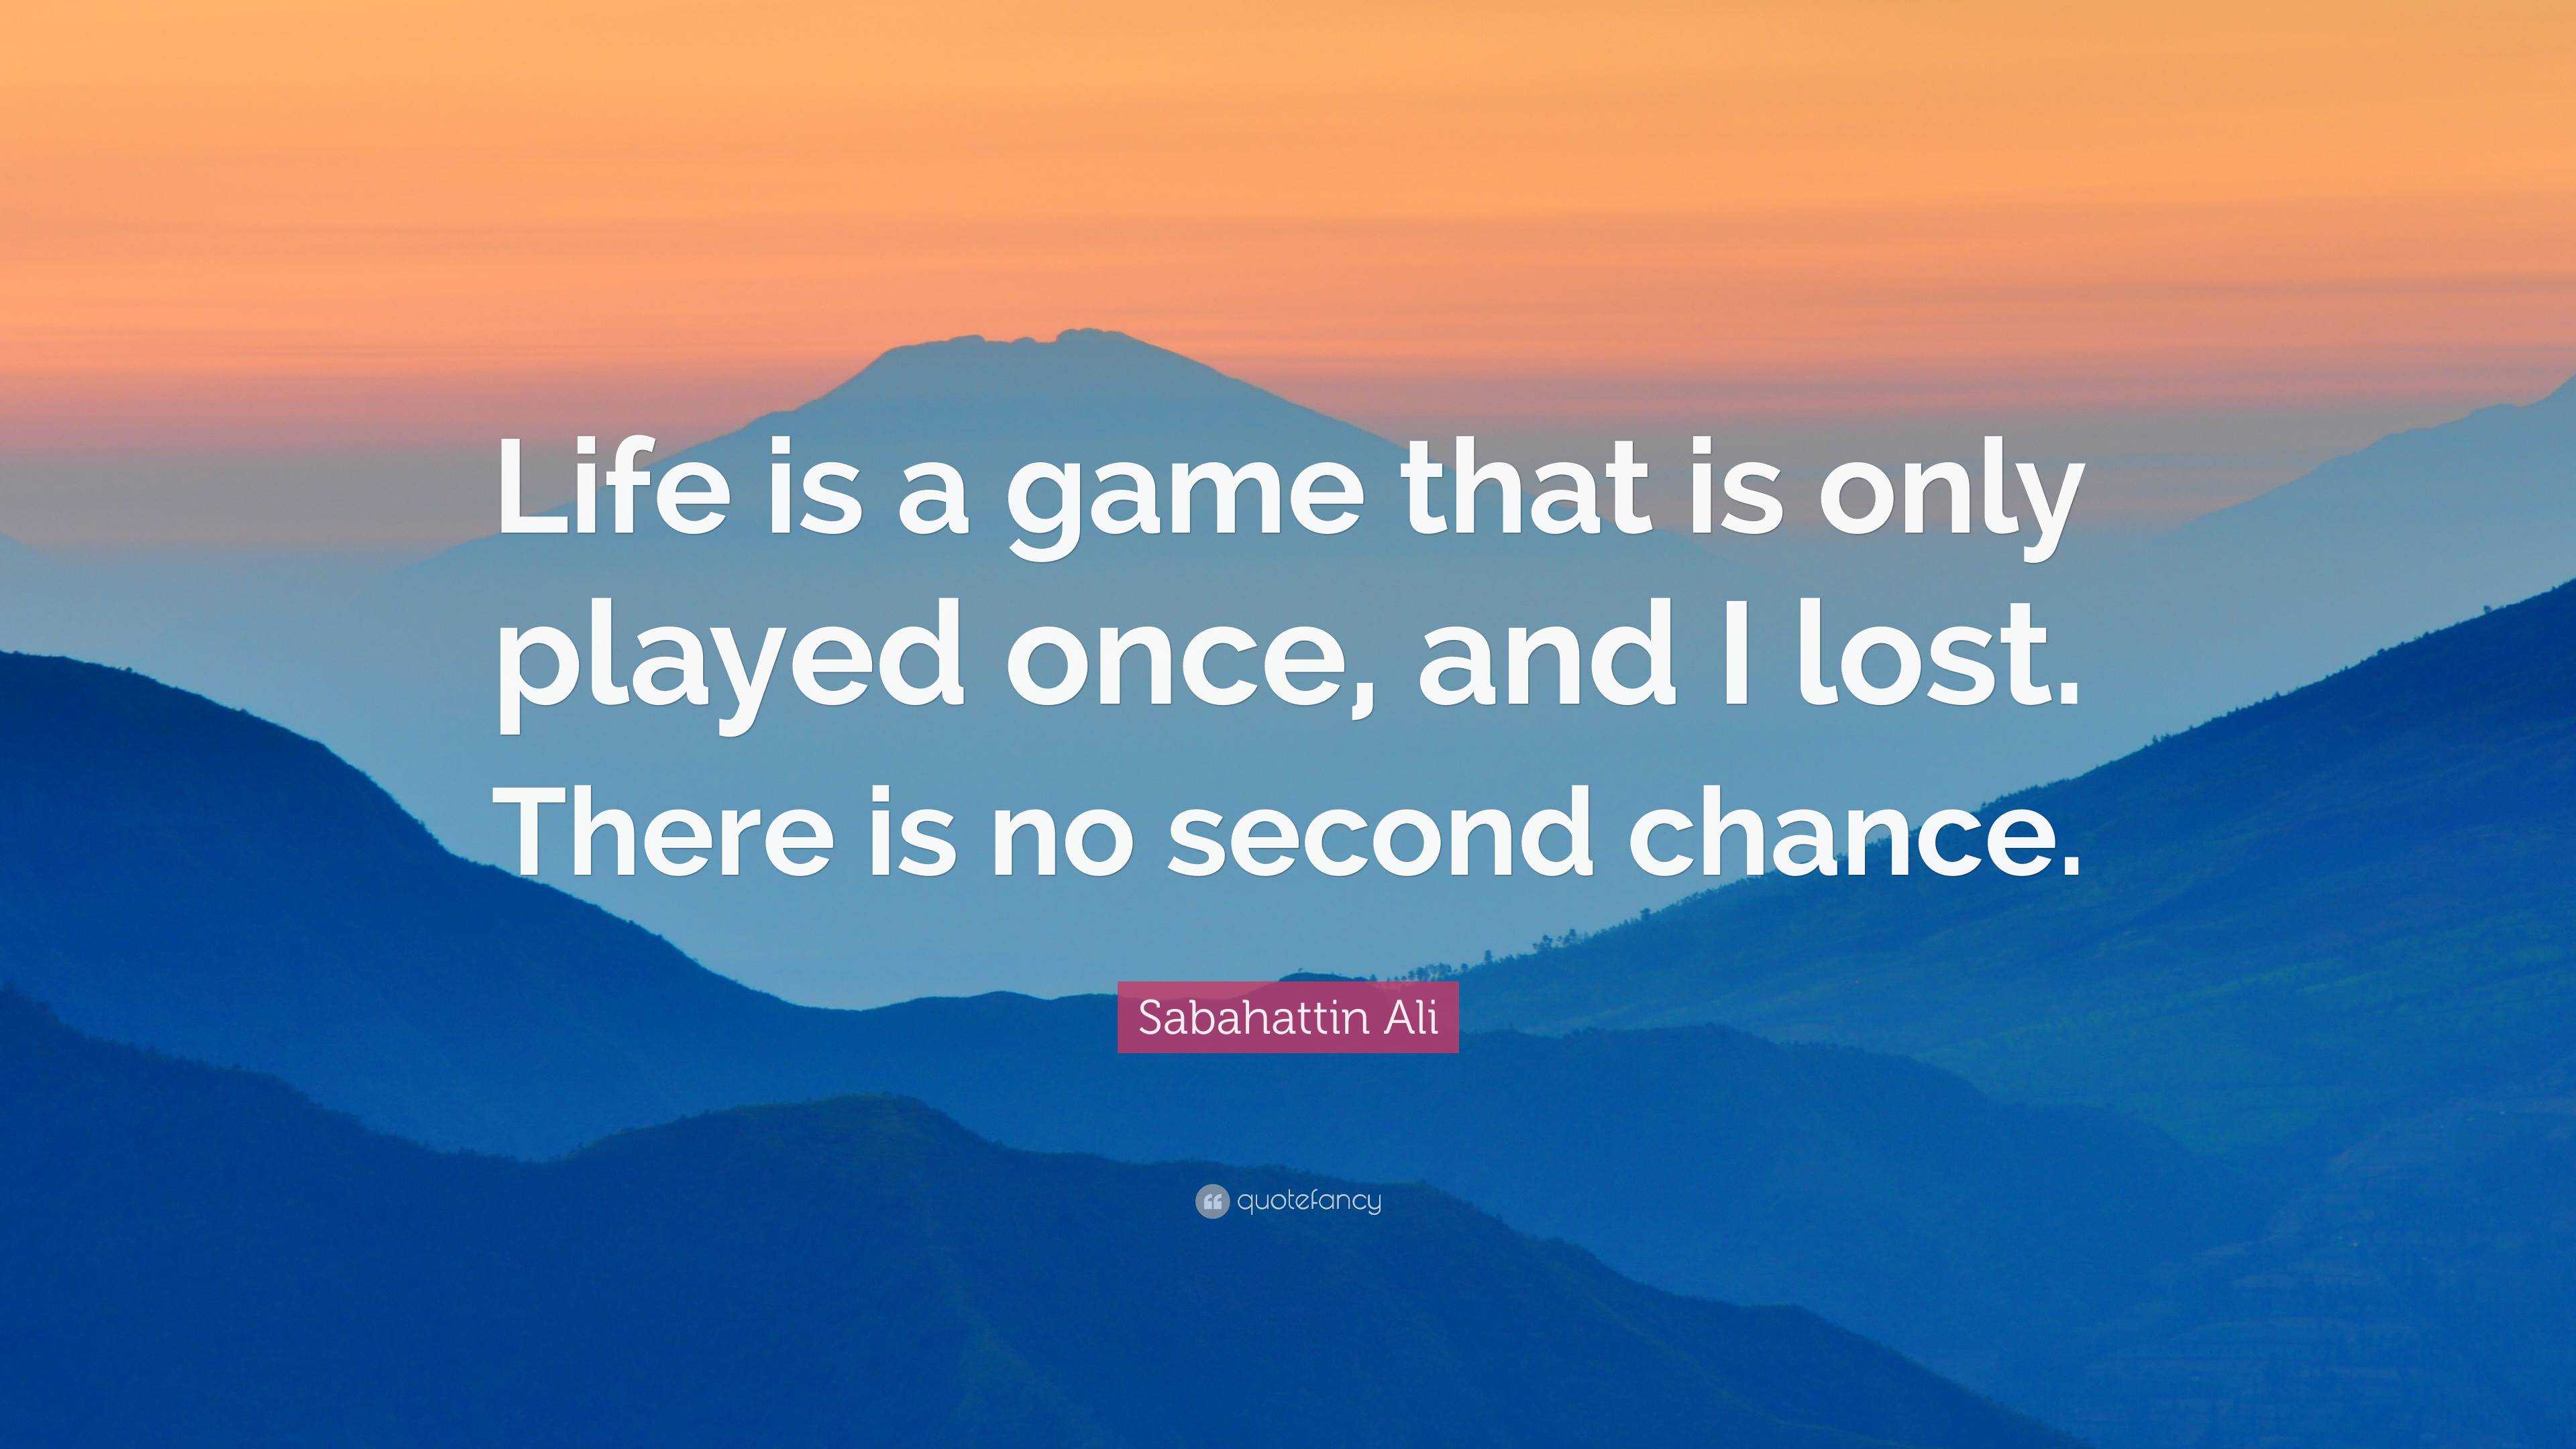 Sabahattin Ali Quote: “Life is a game that is only played once, and I lost.  There